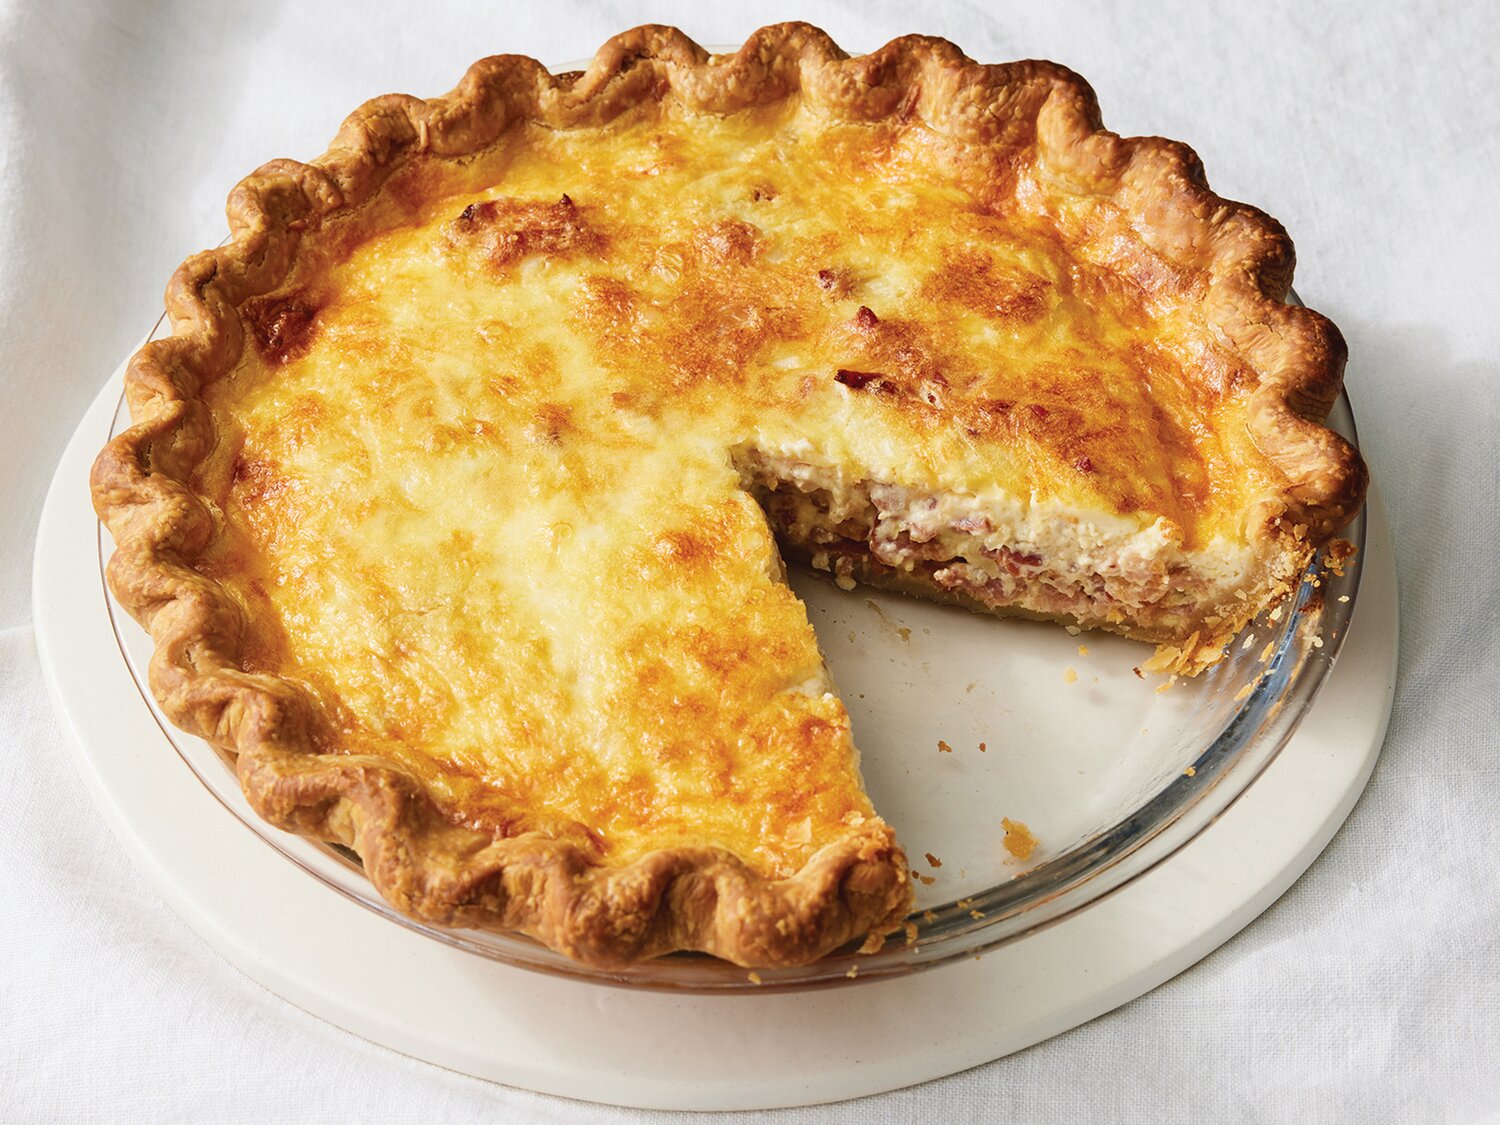 Quiche Lorraine is the most basic quiche recipe you can find and includes just a few ingredients.